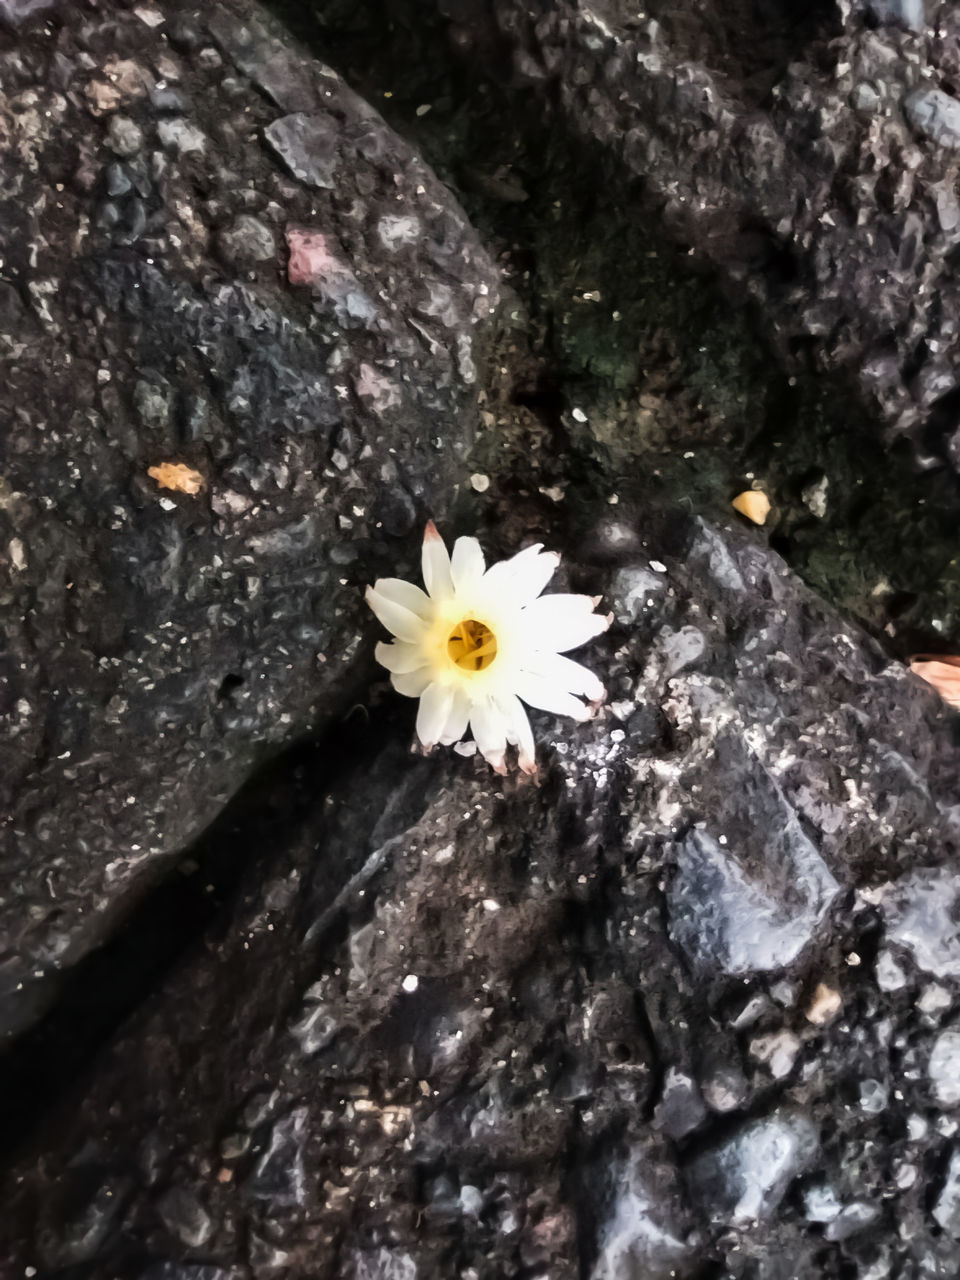 CLOSE-UP OF WHITE FLOWERING PLANT ON ROCKS